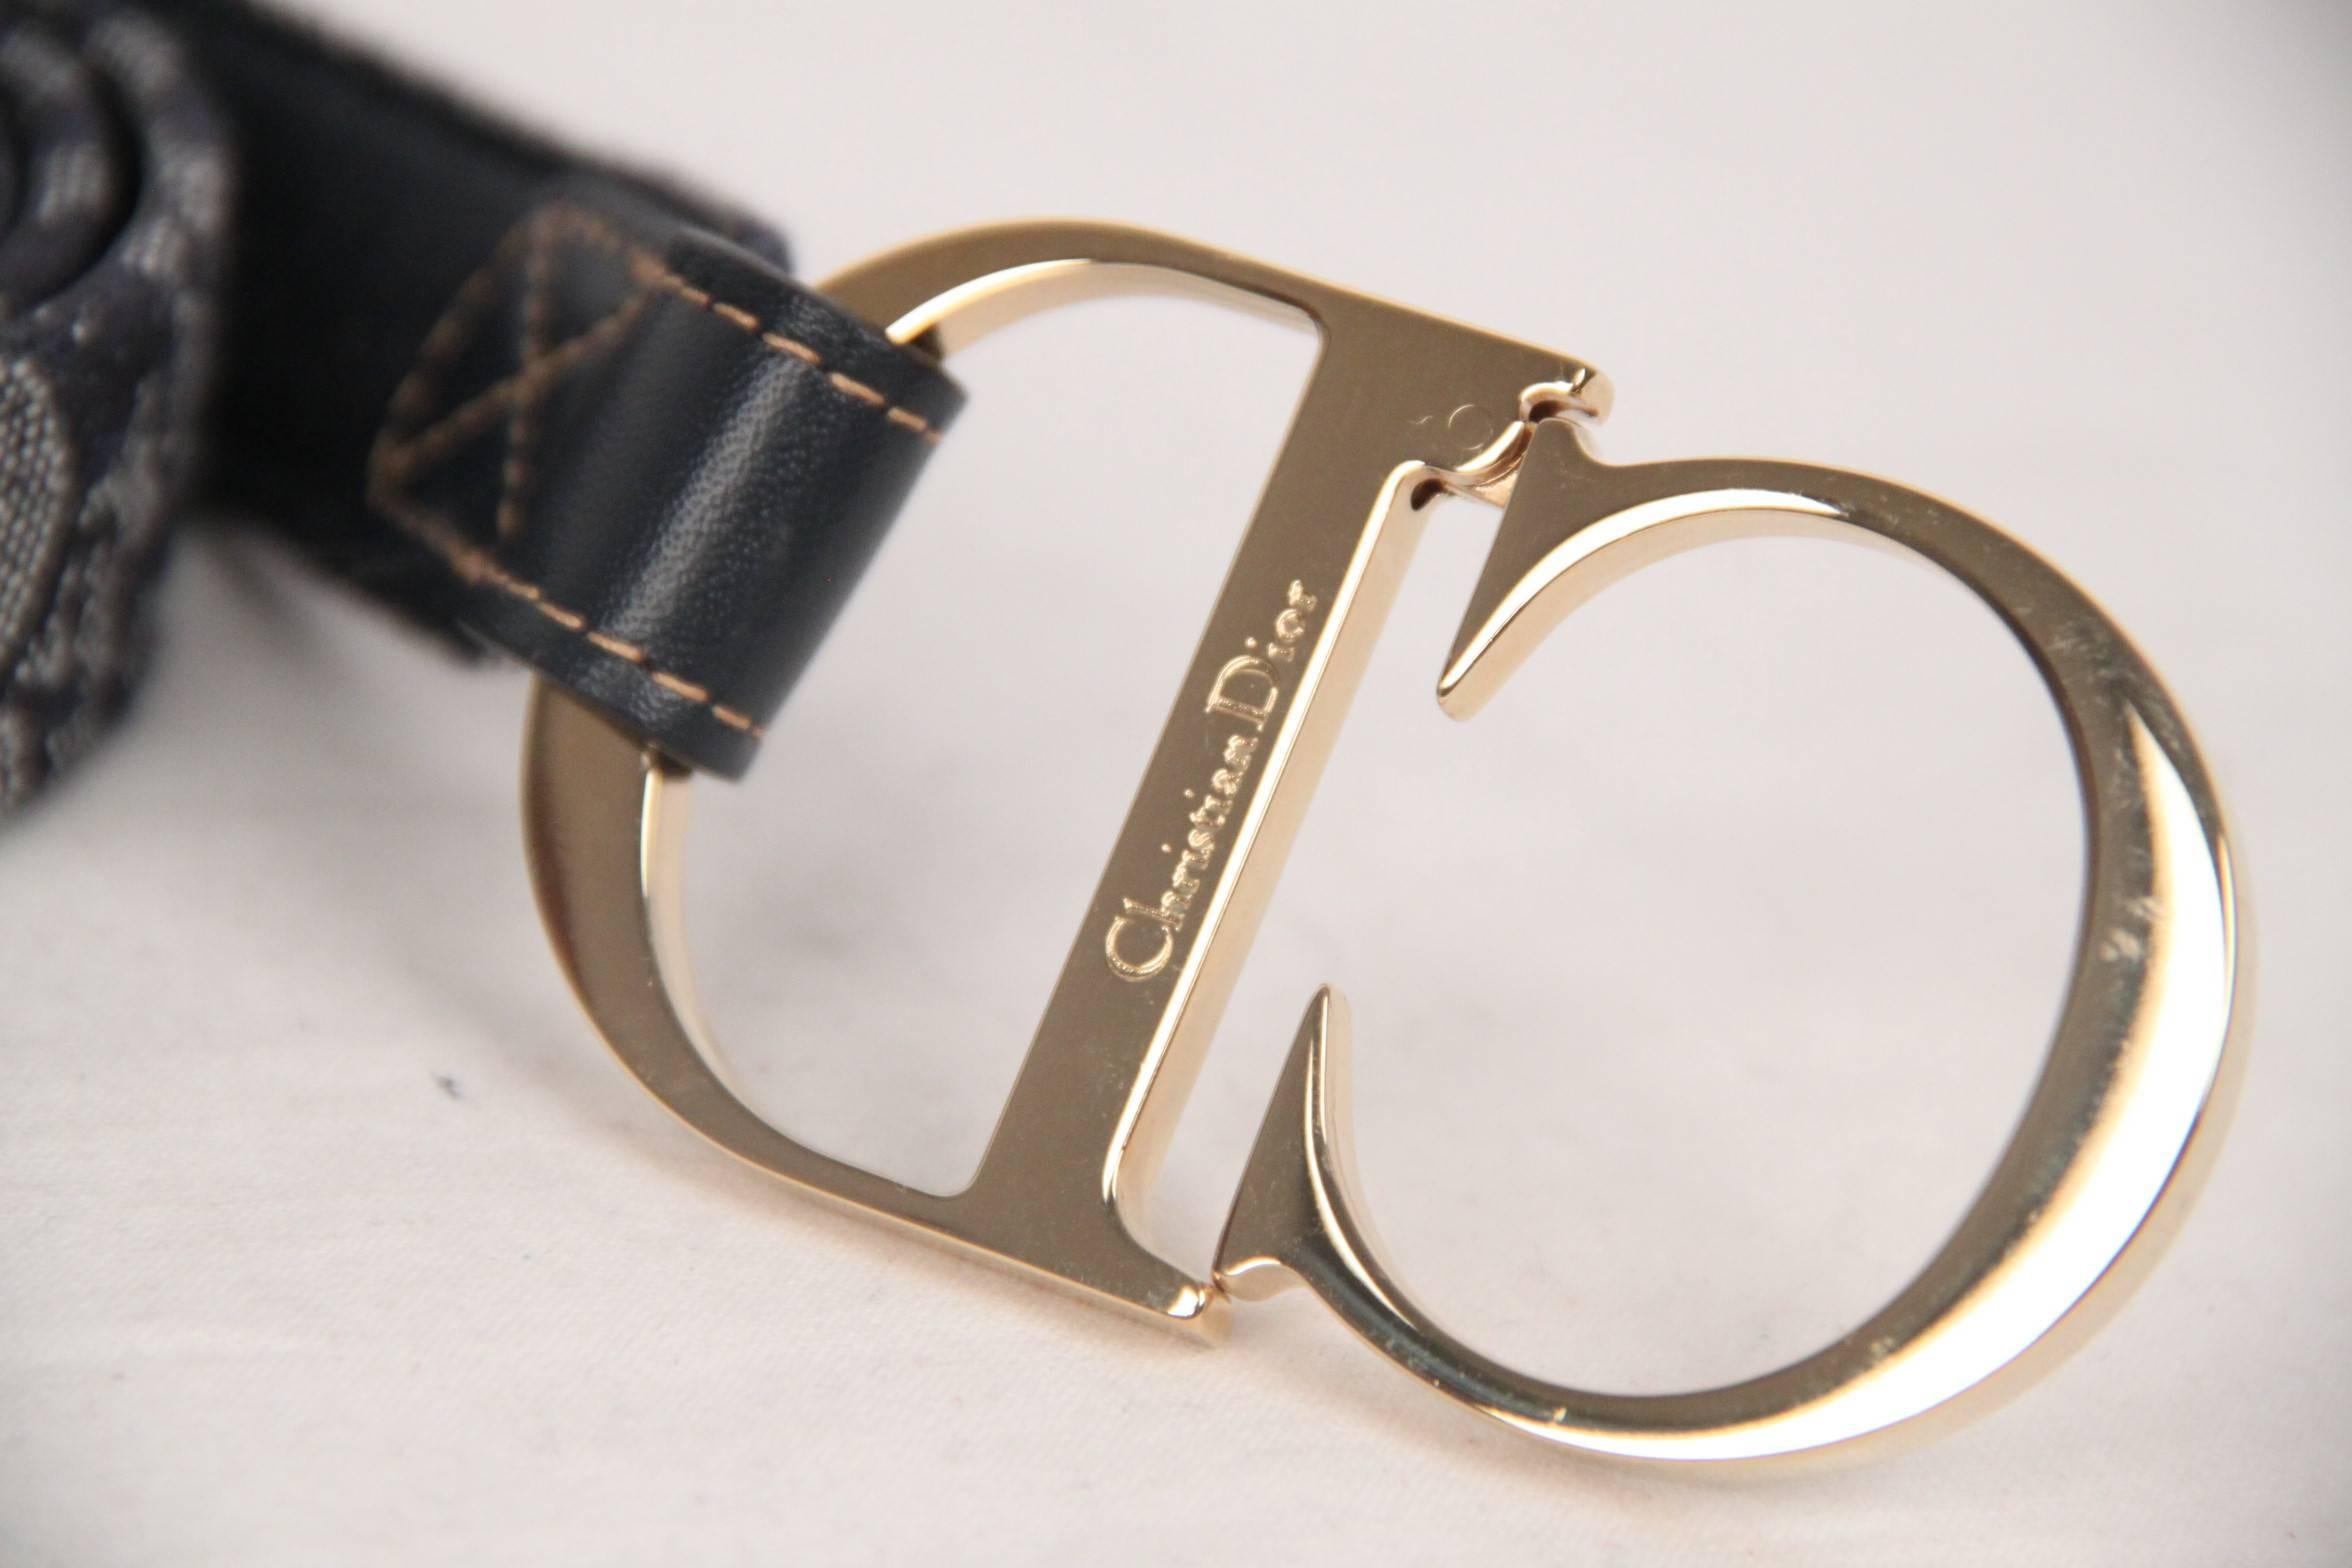 - Beautiful Christian Dior belt
- Blue monogram canvas & leather
- Gold metal CD buckle
- It fastens with Velcro fastener over the 'C'
- Width: 1 inch - 2,5 cm
- Total lenght: 39 inches - 99 cm

Logos / Tags: 'CHRISTIAN DIOR Paris' embossed on